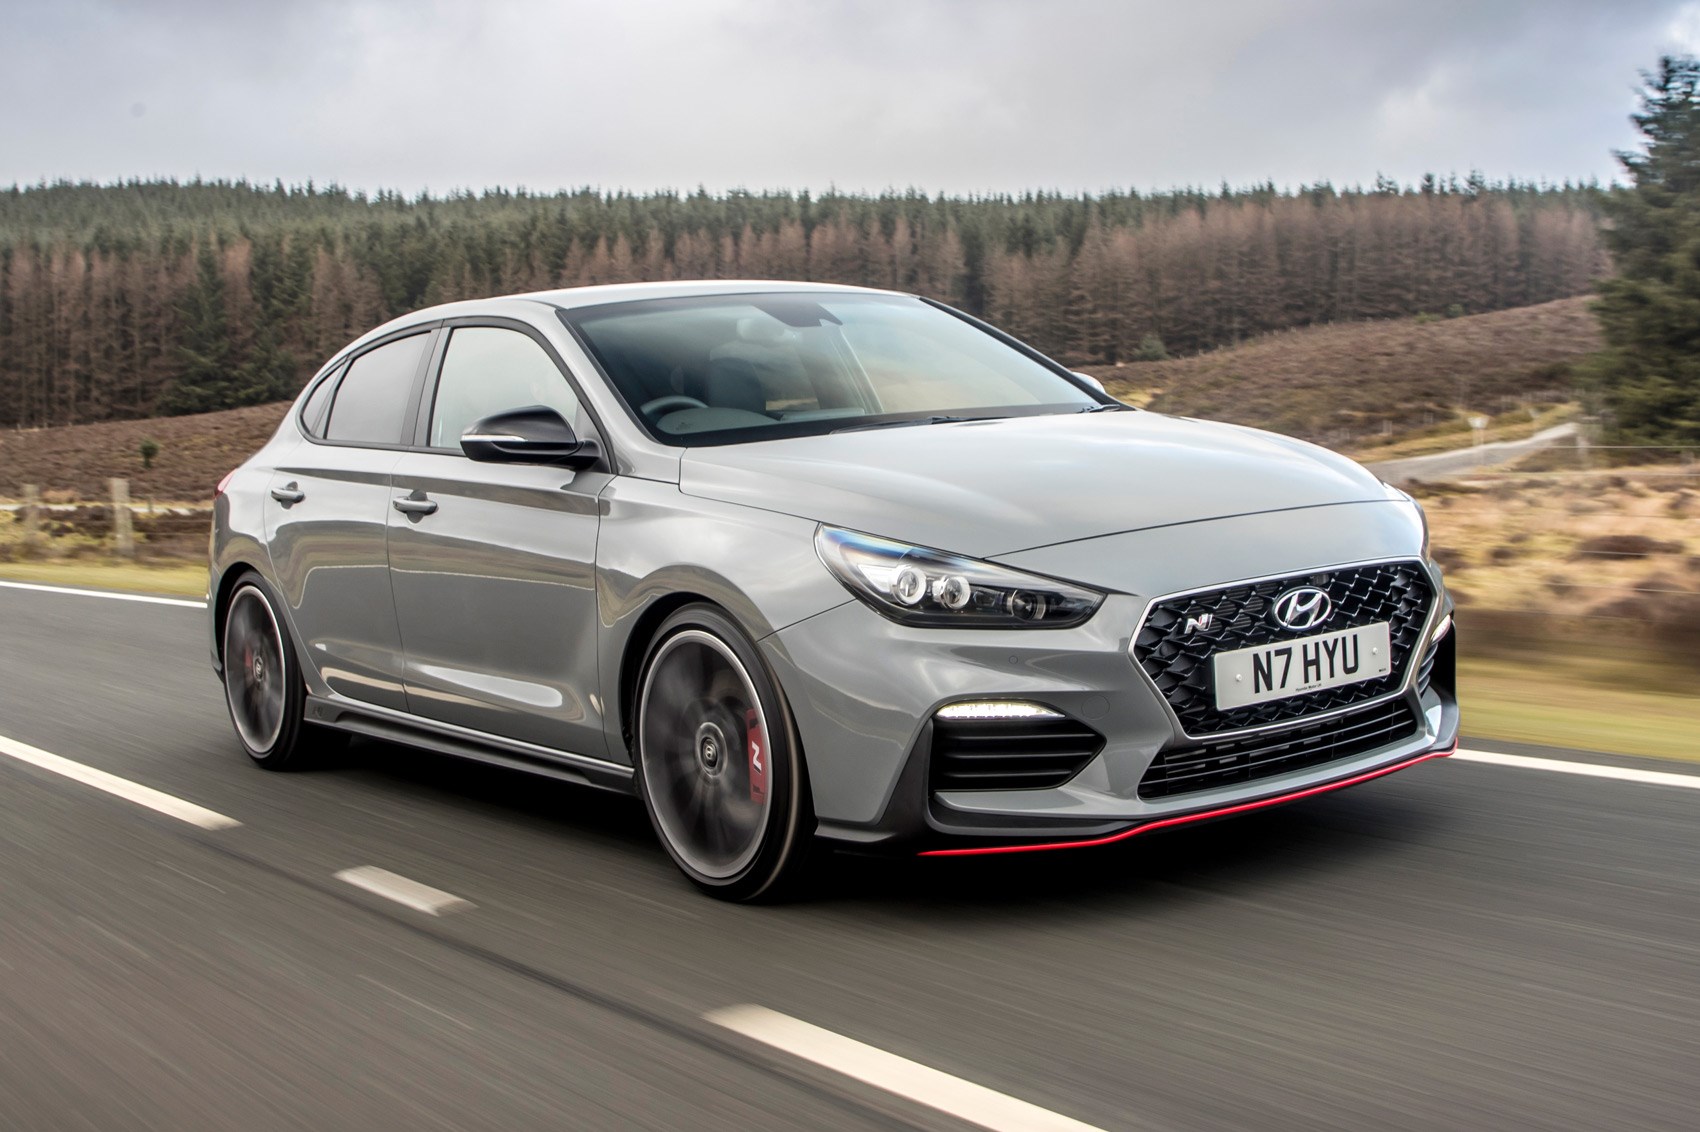 Hyundai i30 Fastback N (2019) review: grown-up hot hatch